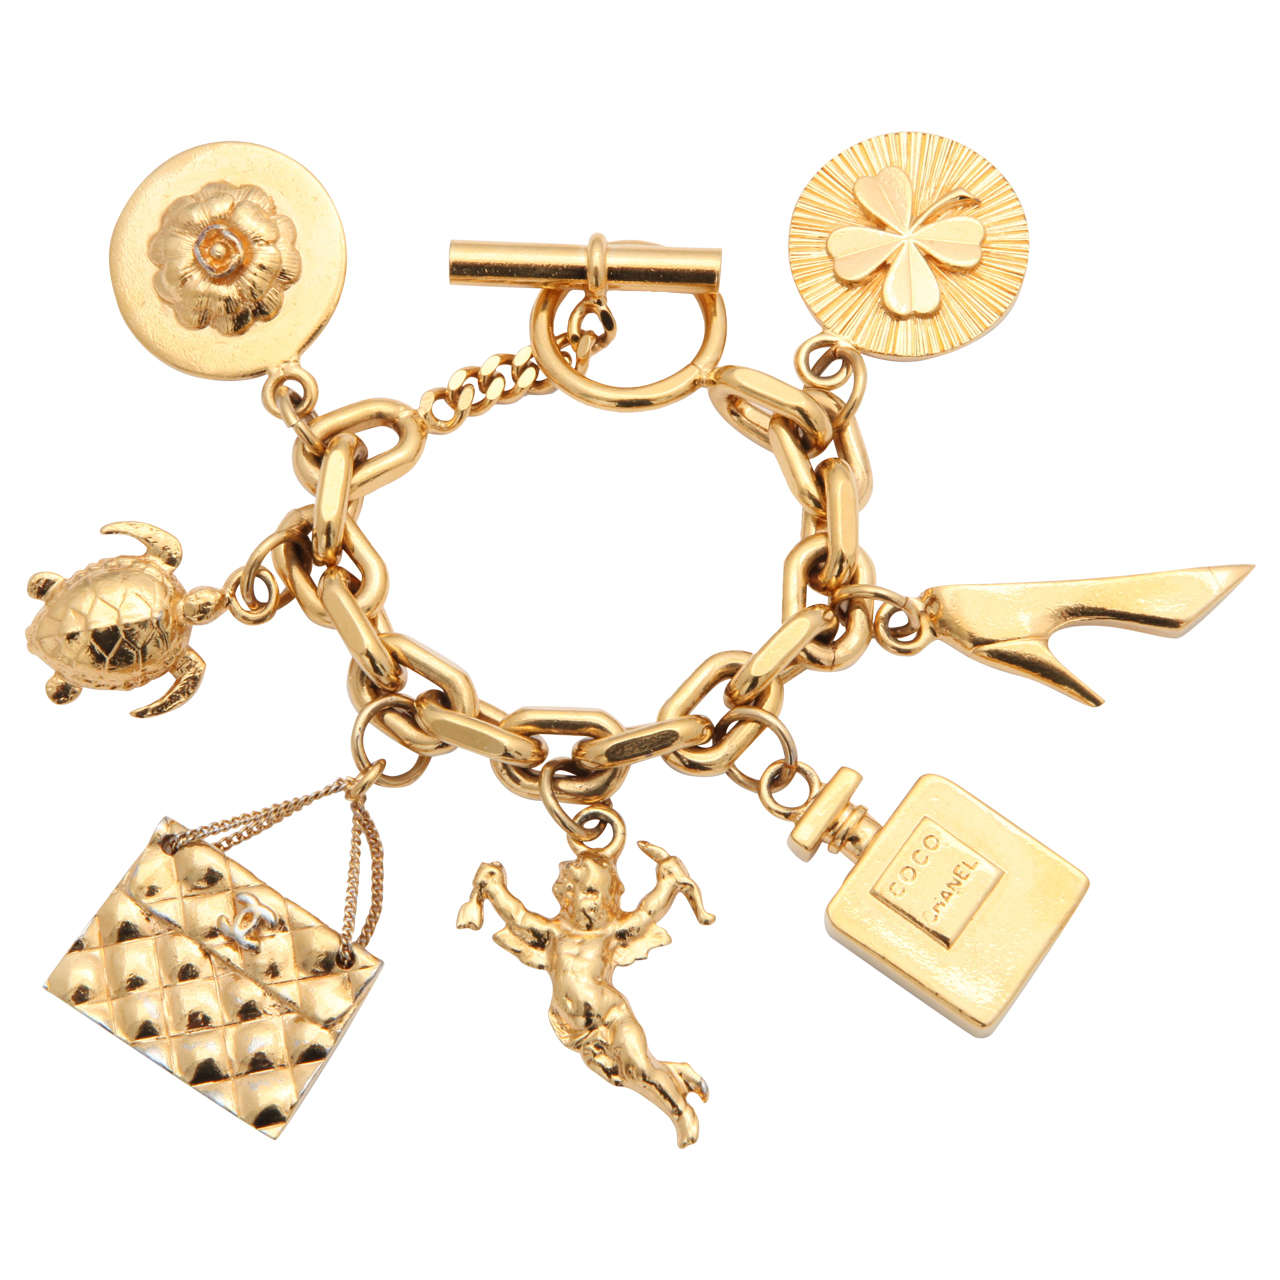 Chanel Vintage Charms